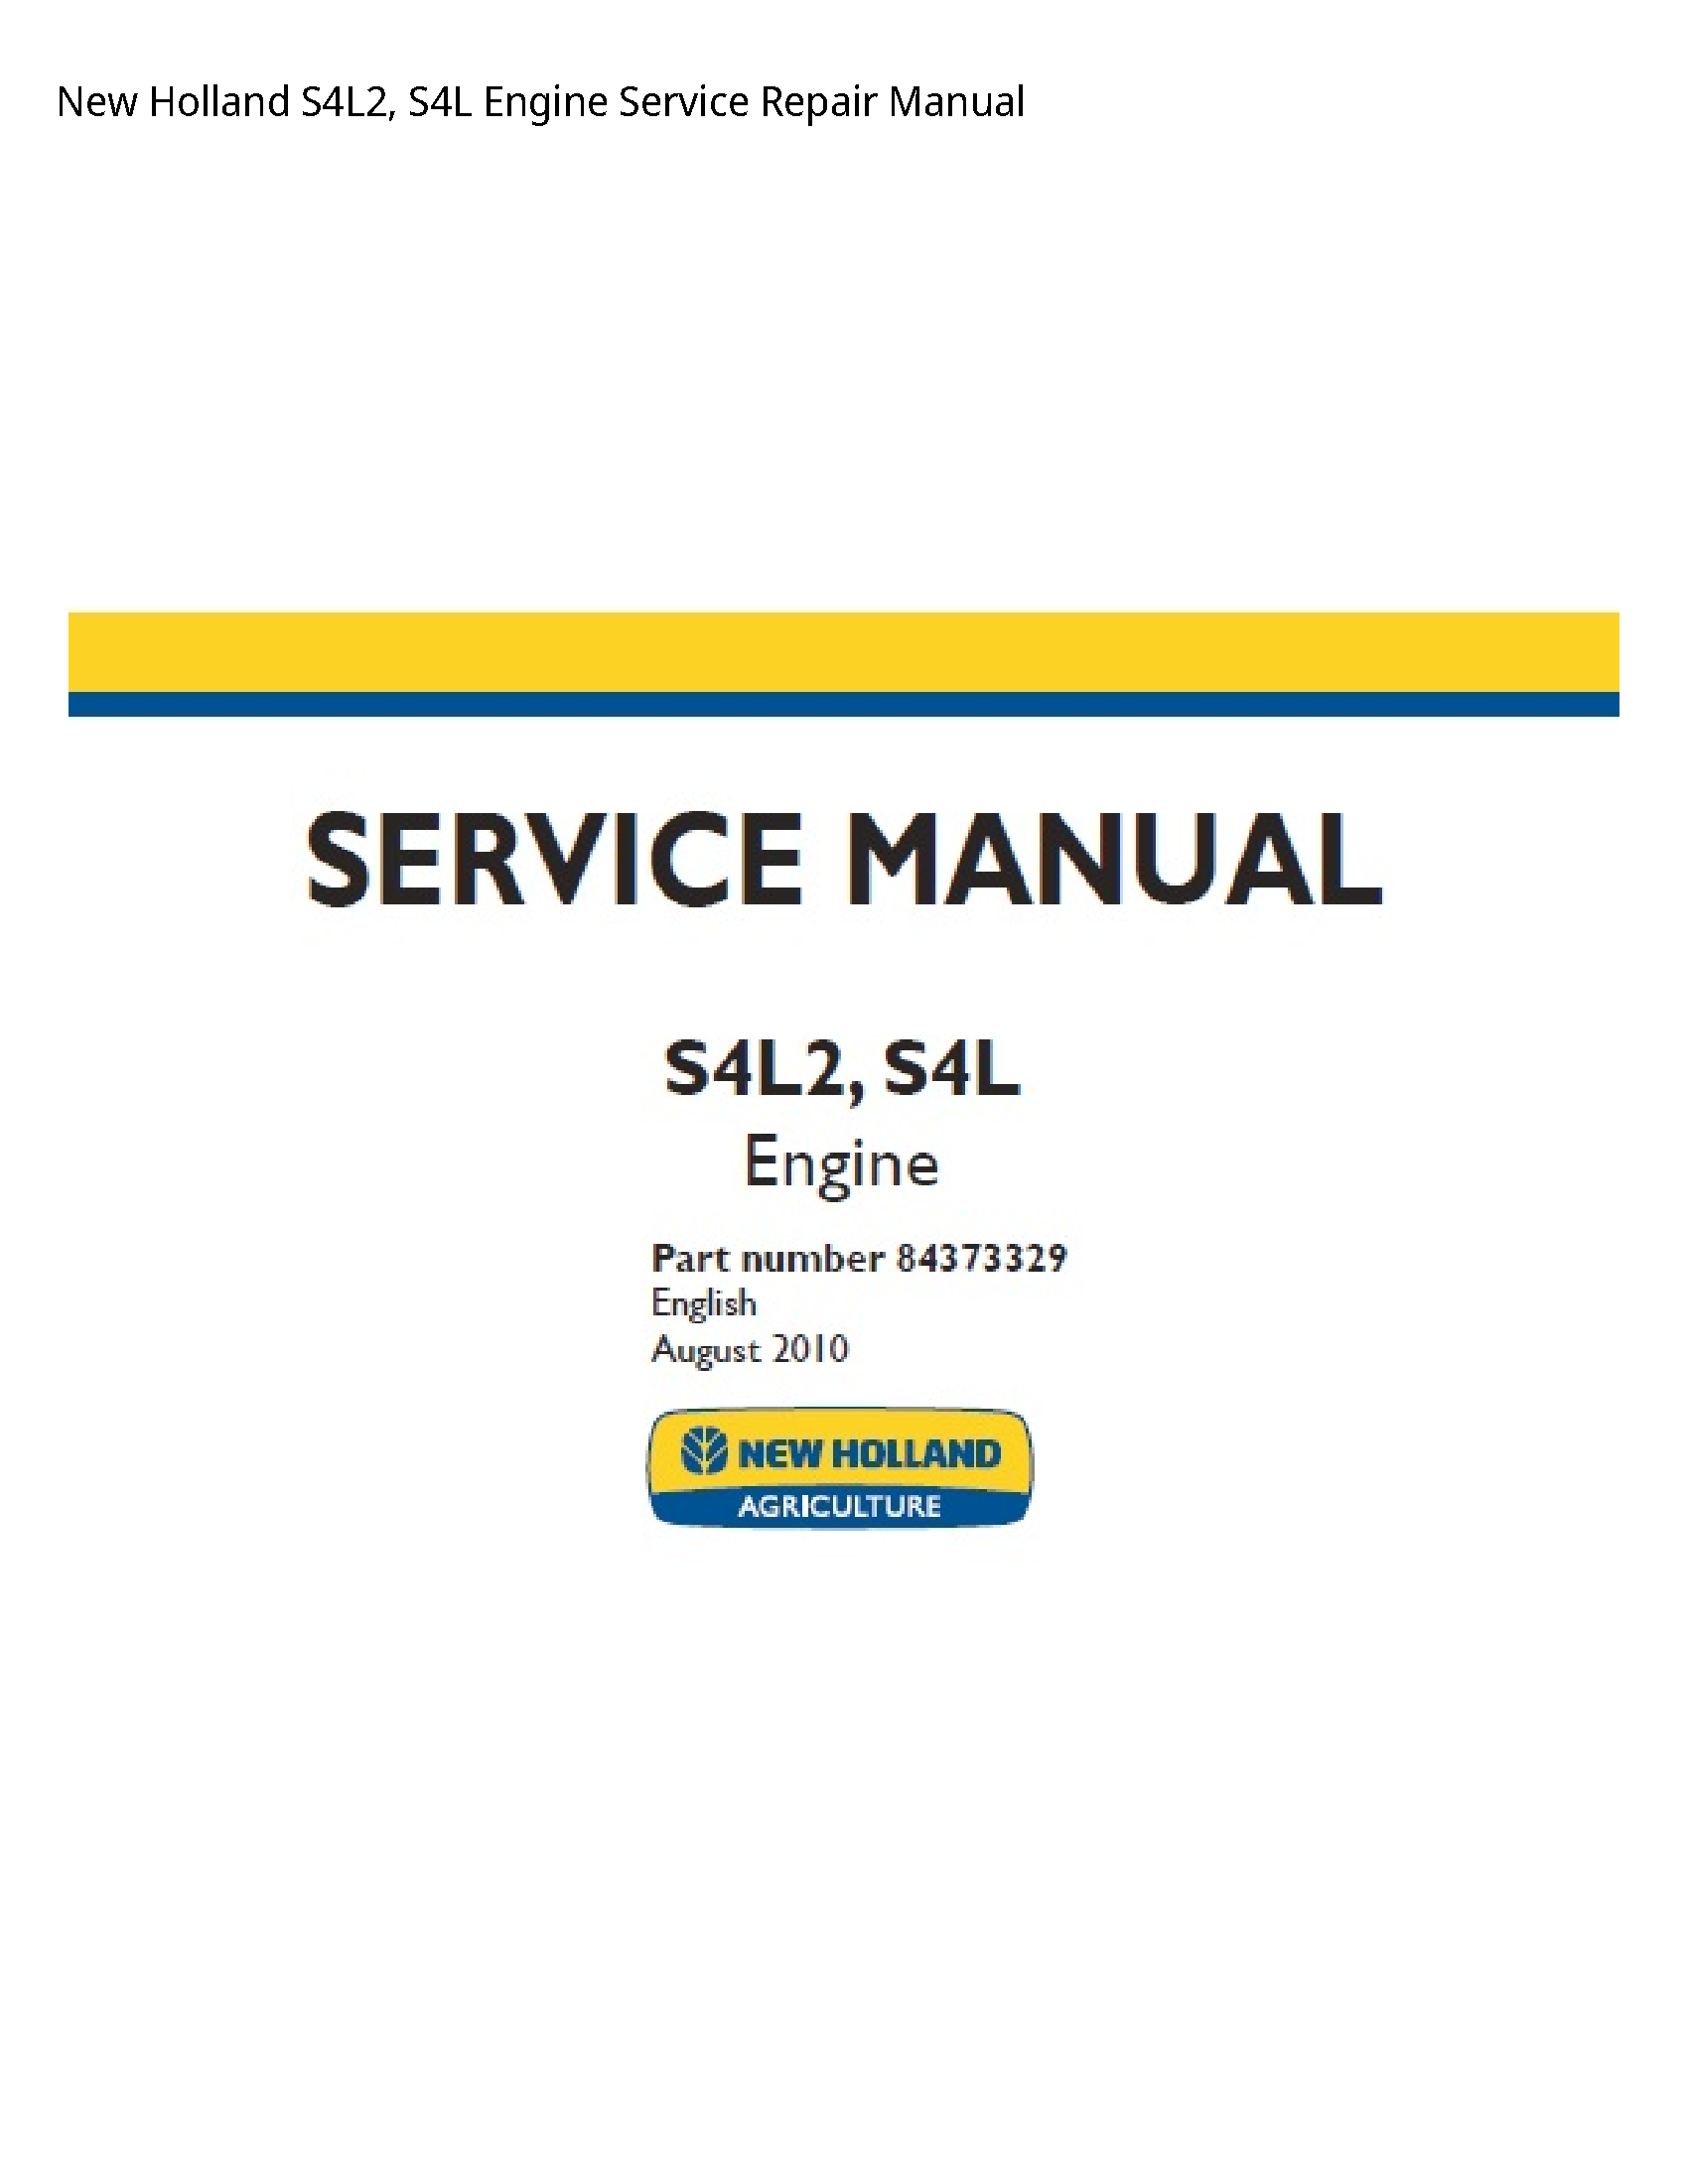 New Holland S4L2 Engine manual